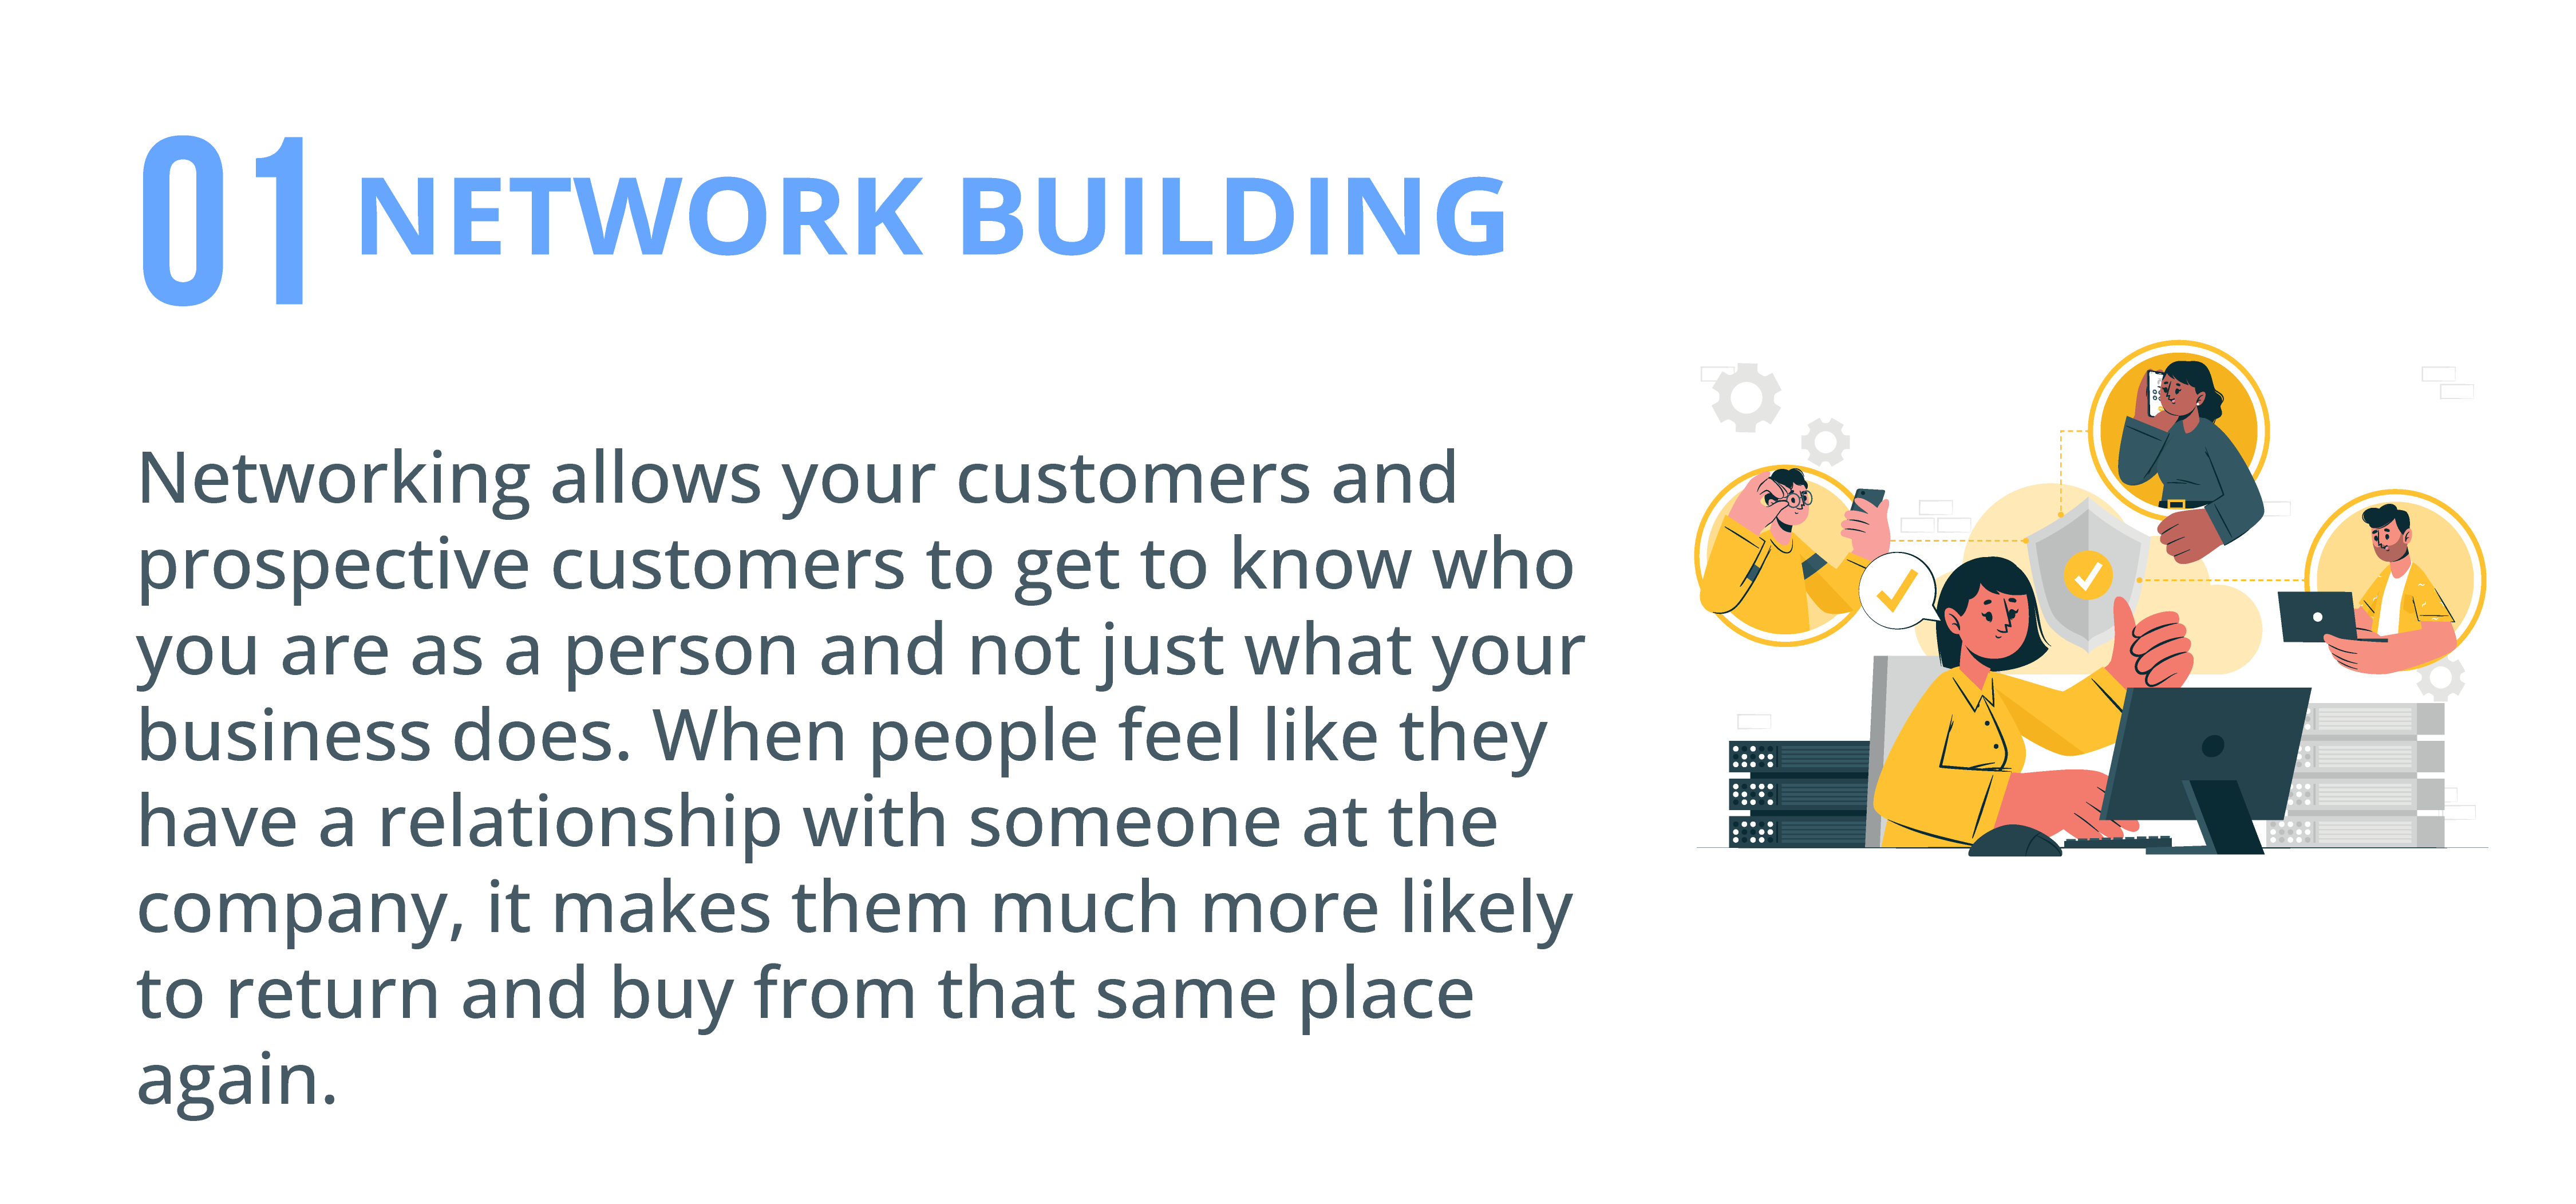 Network Building to improve Customer Relationships